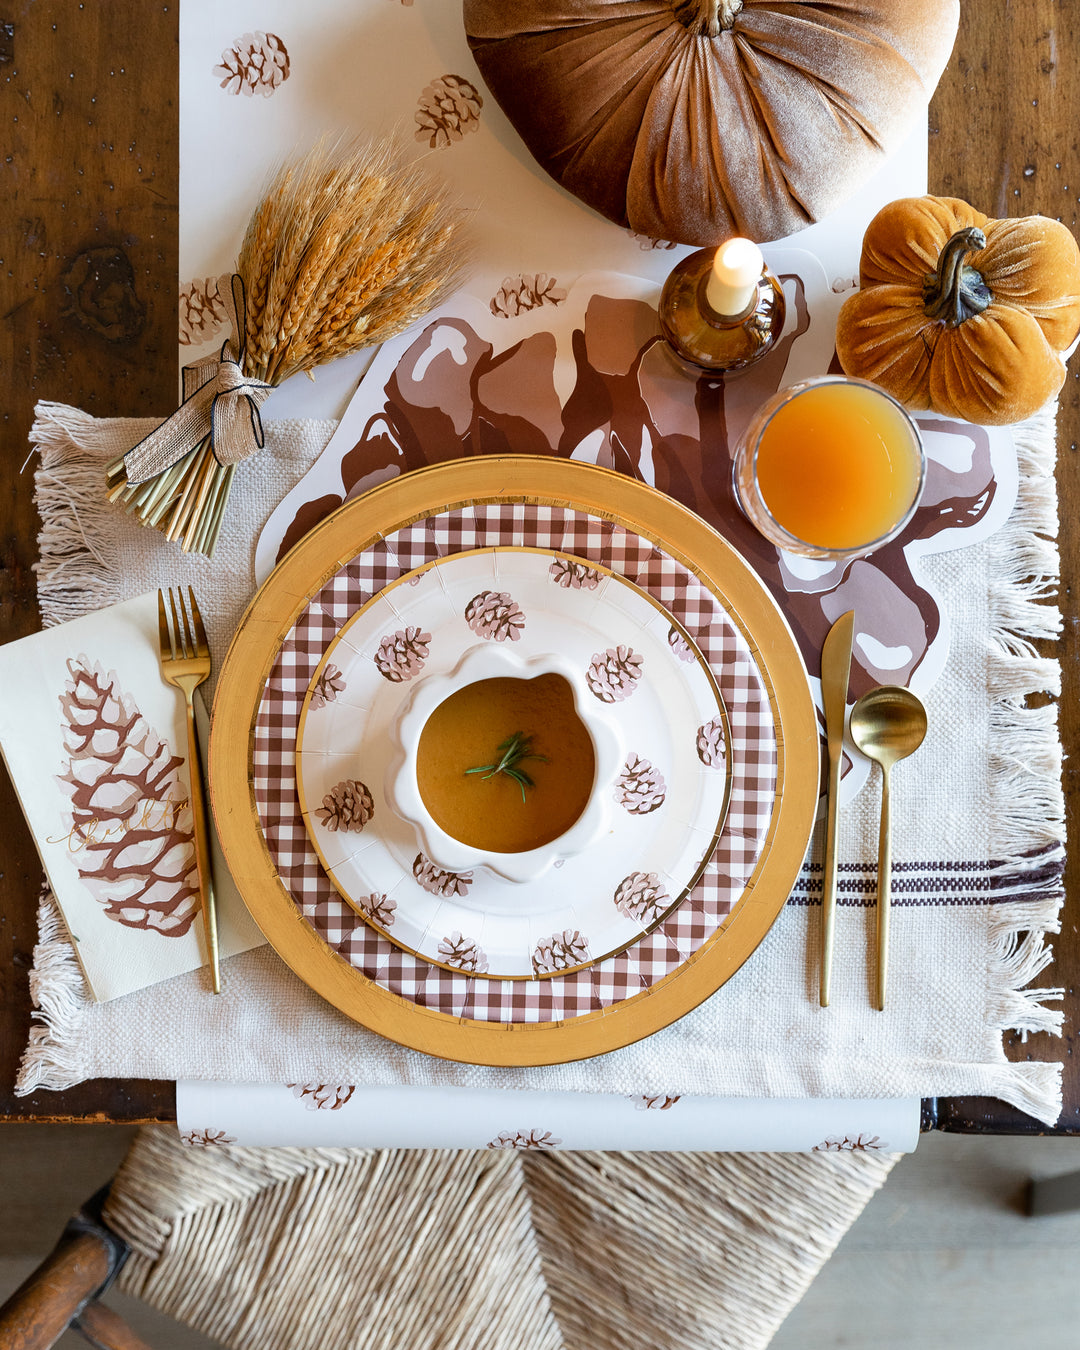 Set your Friendsgiving or Thanksgiving table with any of these warm harvest plates.